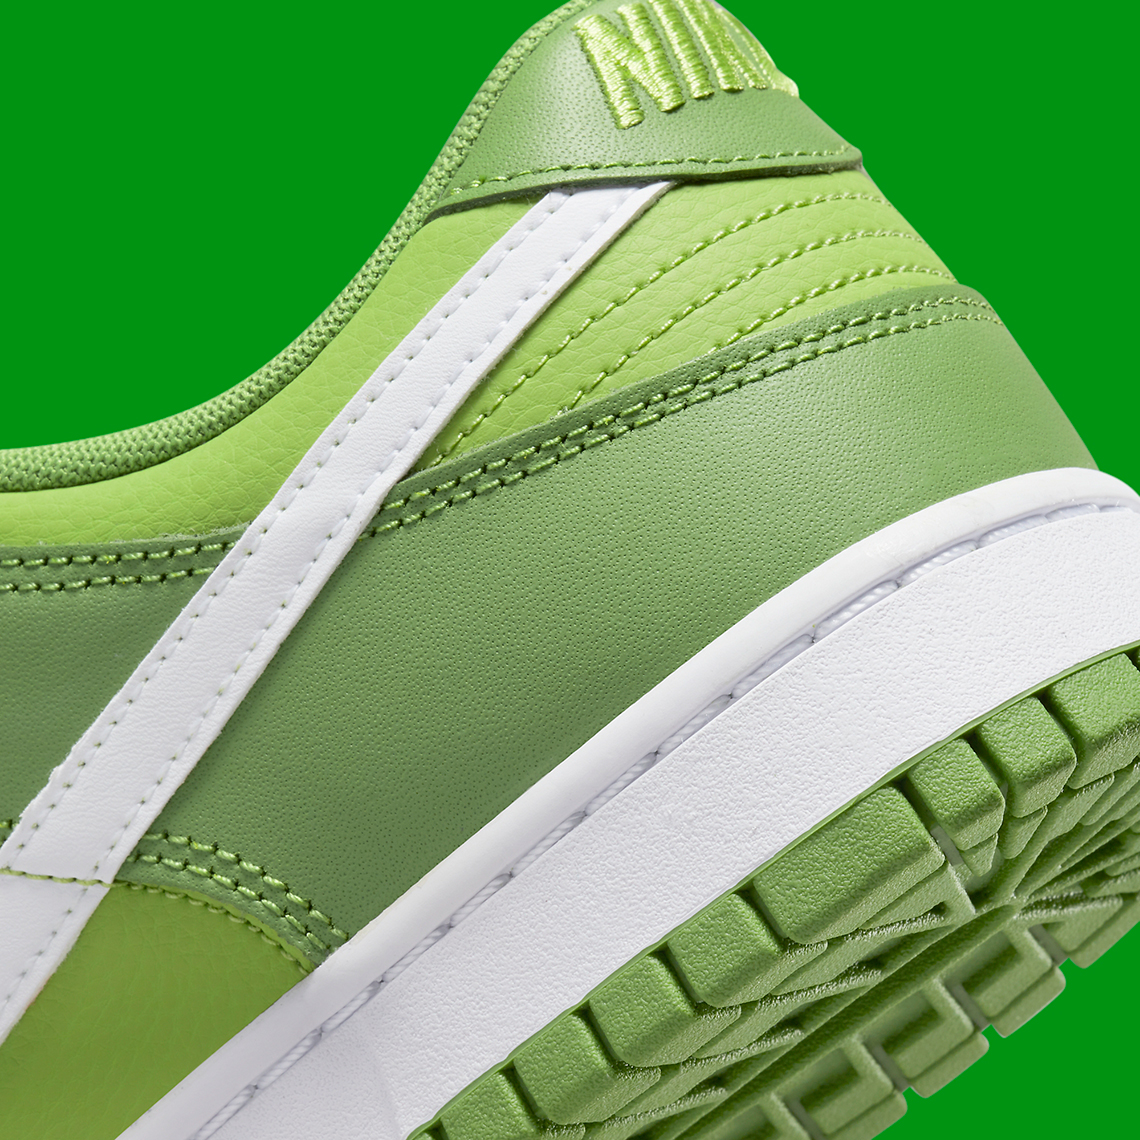 This Satin-Covered Nike Dunk Low Comes In White Team Green - Sneaker News